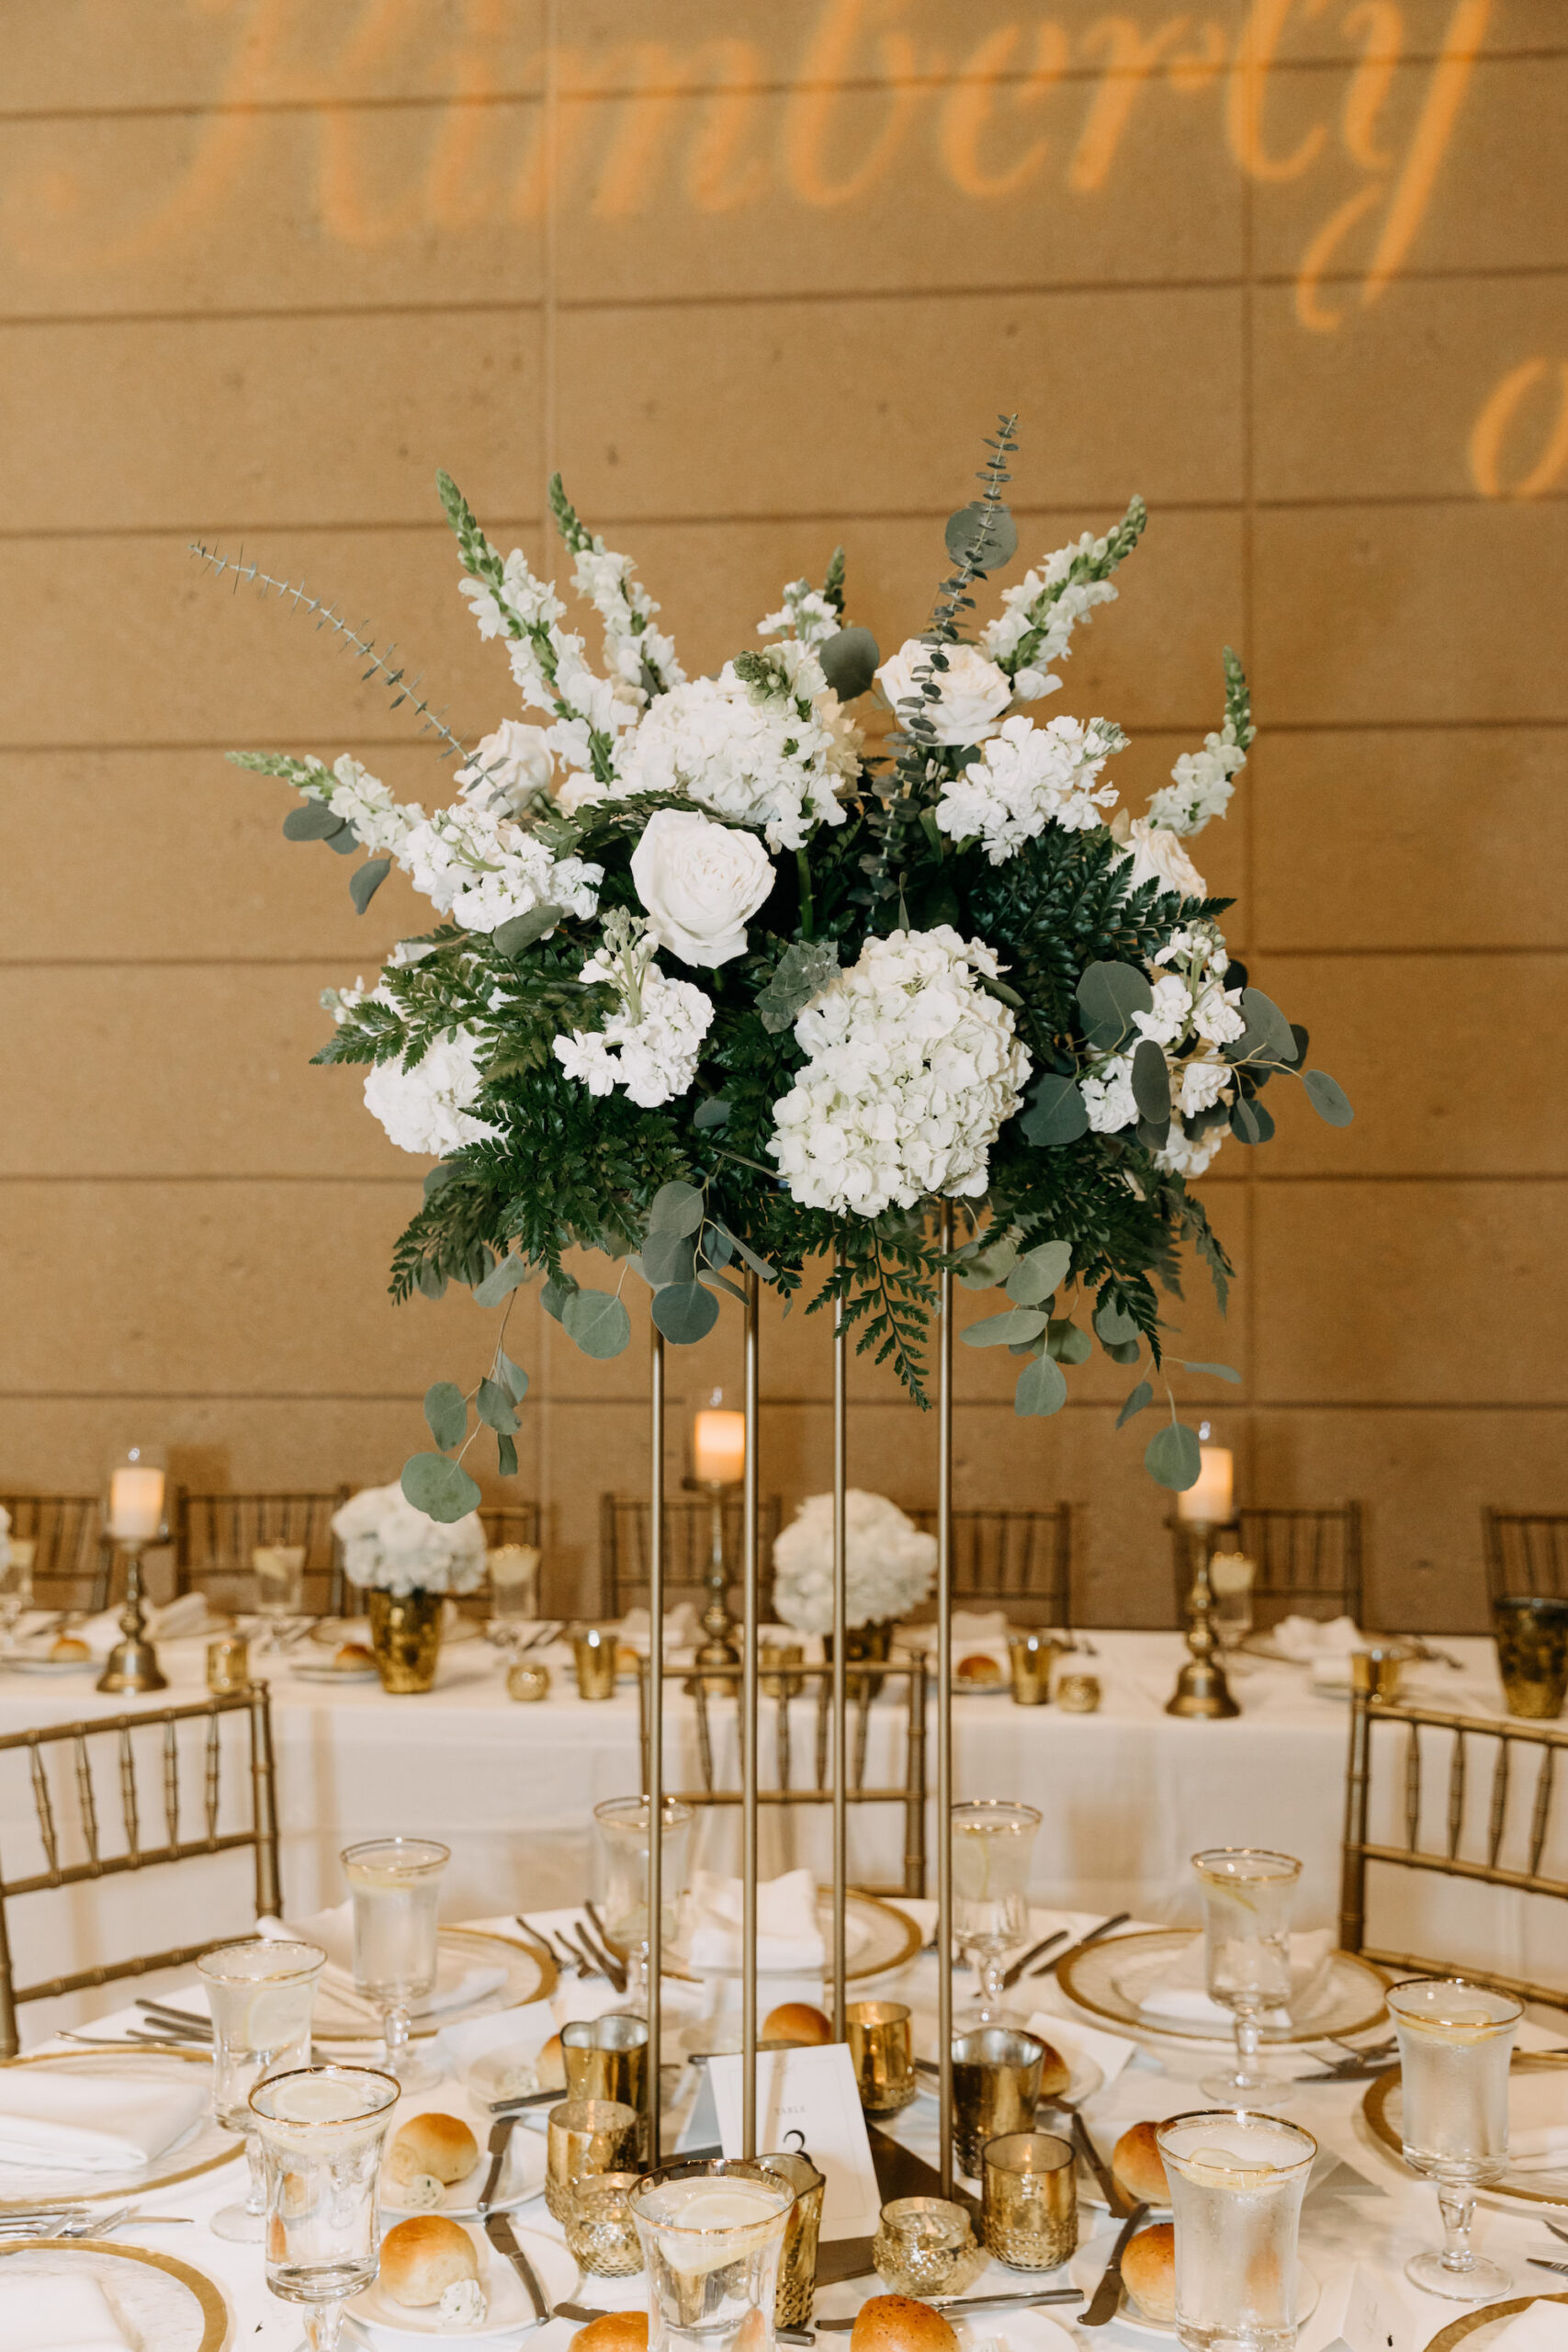 Tall Gold Column Vase with White Roses, White Veronica, and White Hydrangea Floral Centerpieces with Greenery | Classic Wedding Reception Inspiration